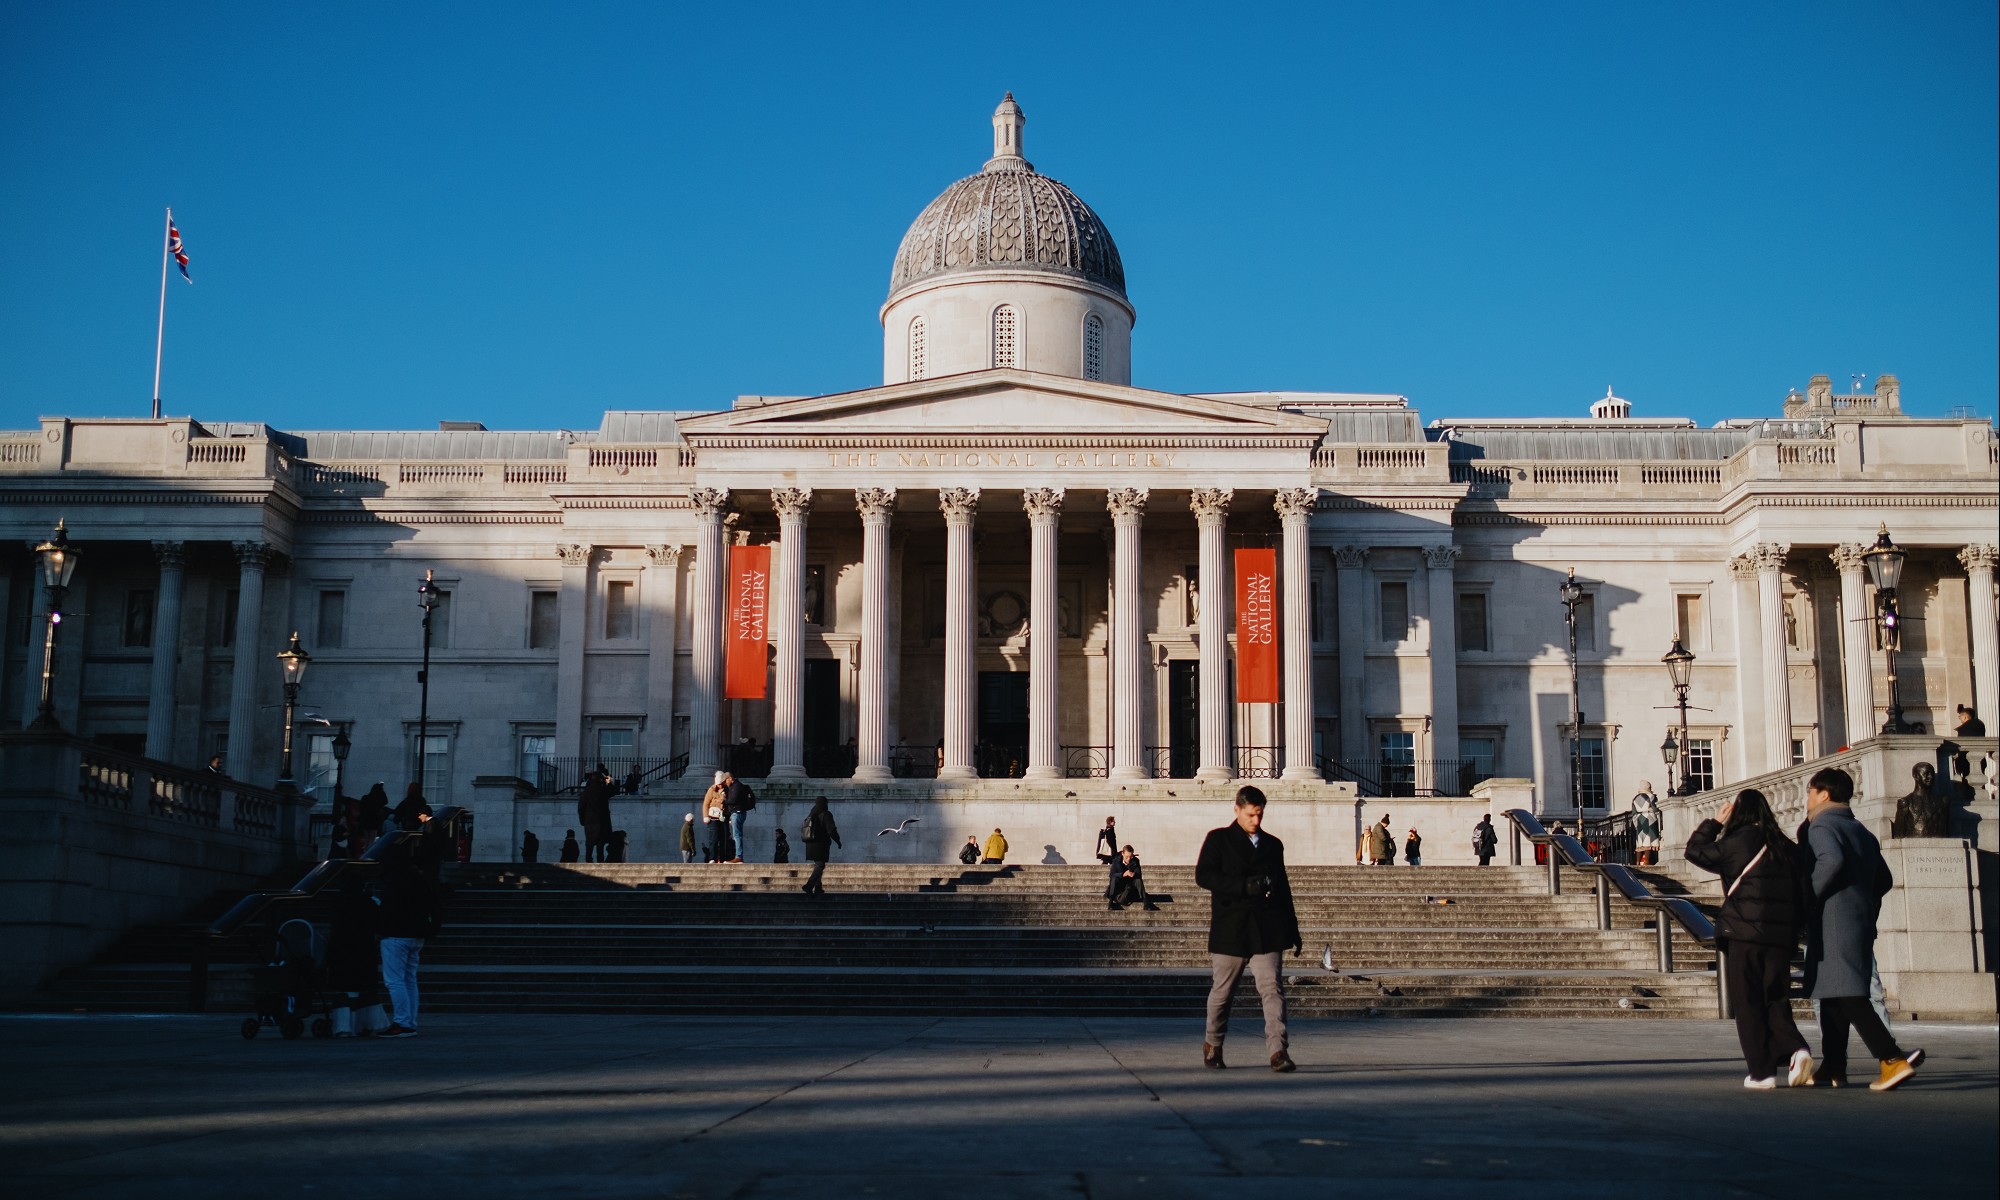 EXHIBITION ON SCREEN: My National Gallery